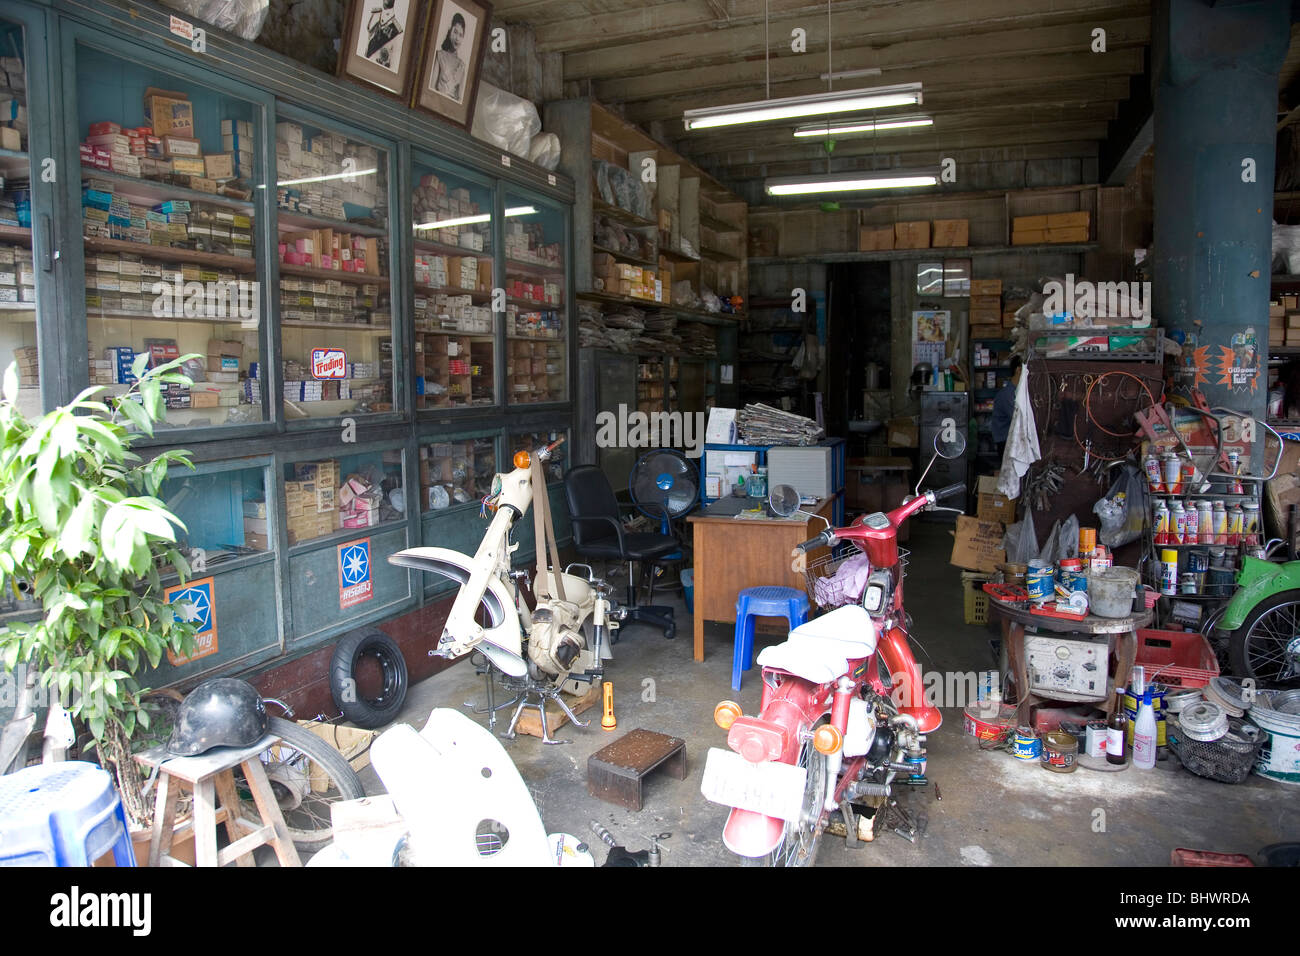 Busy interior of a shop -  fixing bikes and motorcycles in Phuket Stock Photo